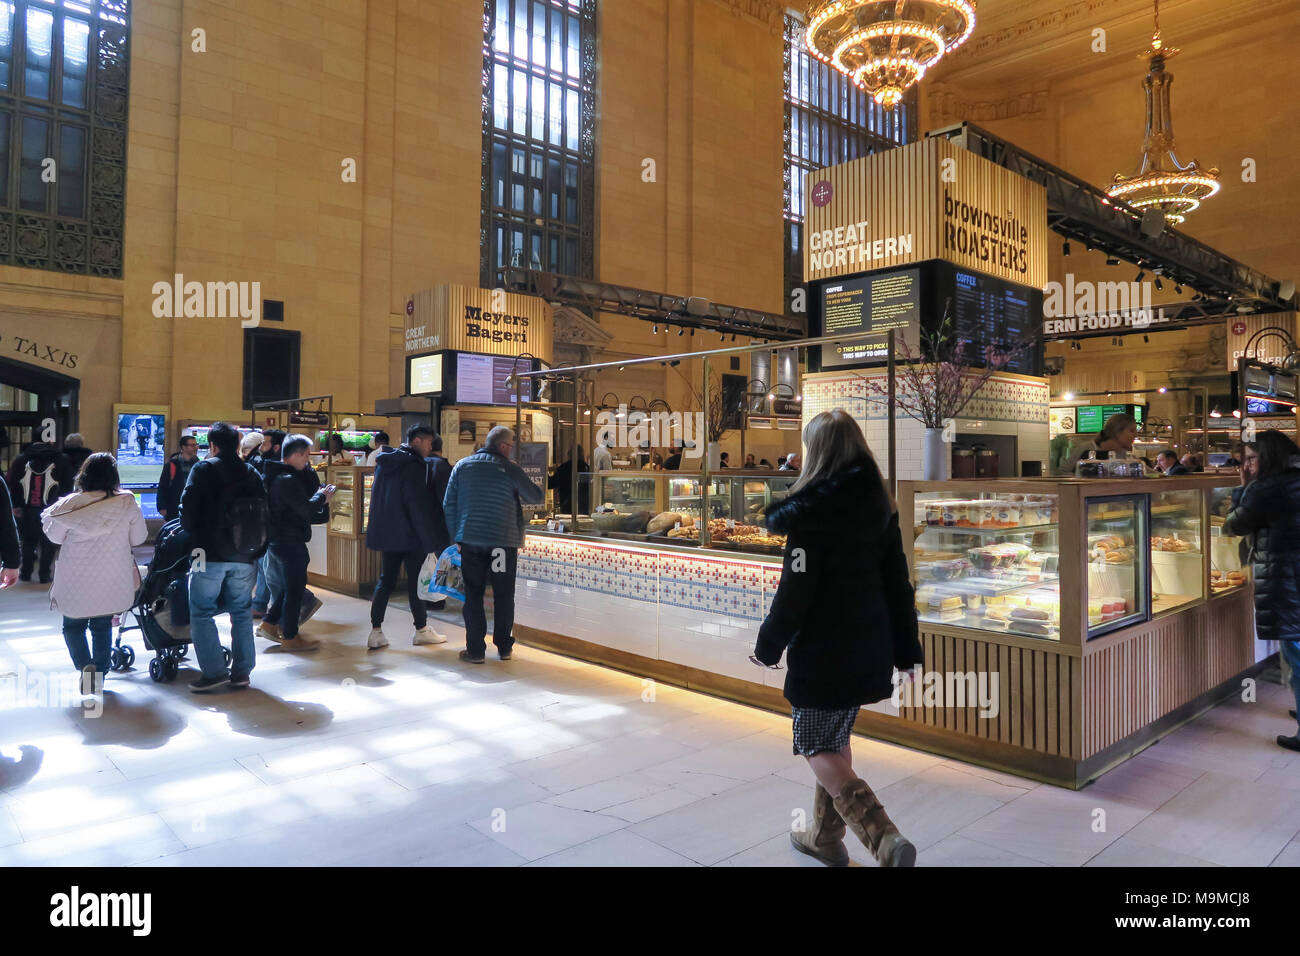 Great Northern Food Hall, Vanderbilt Hall in Grand Central Terminal, NYC, USA Stock Photo